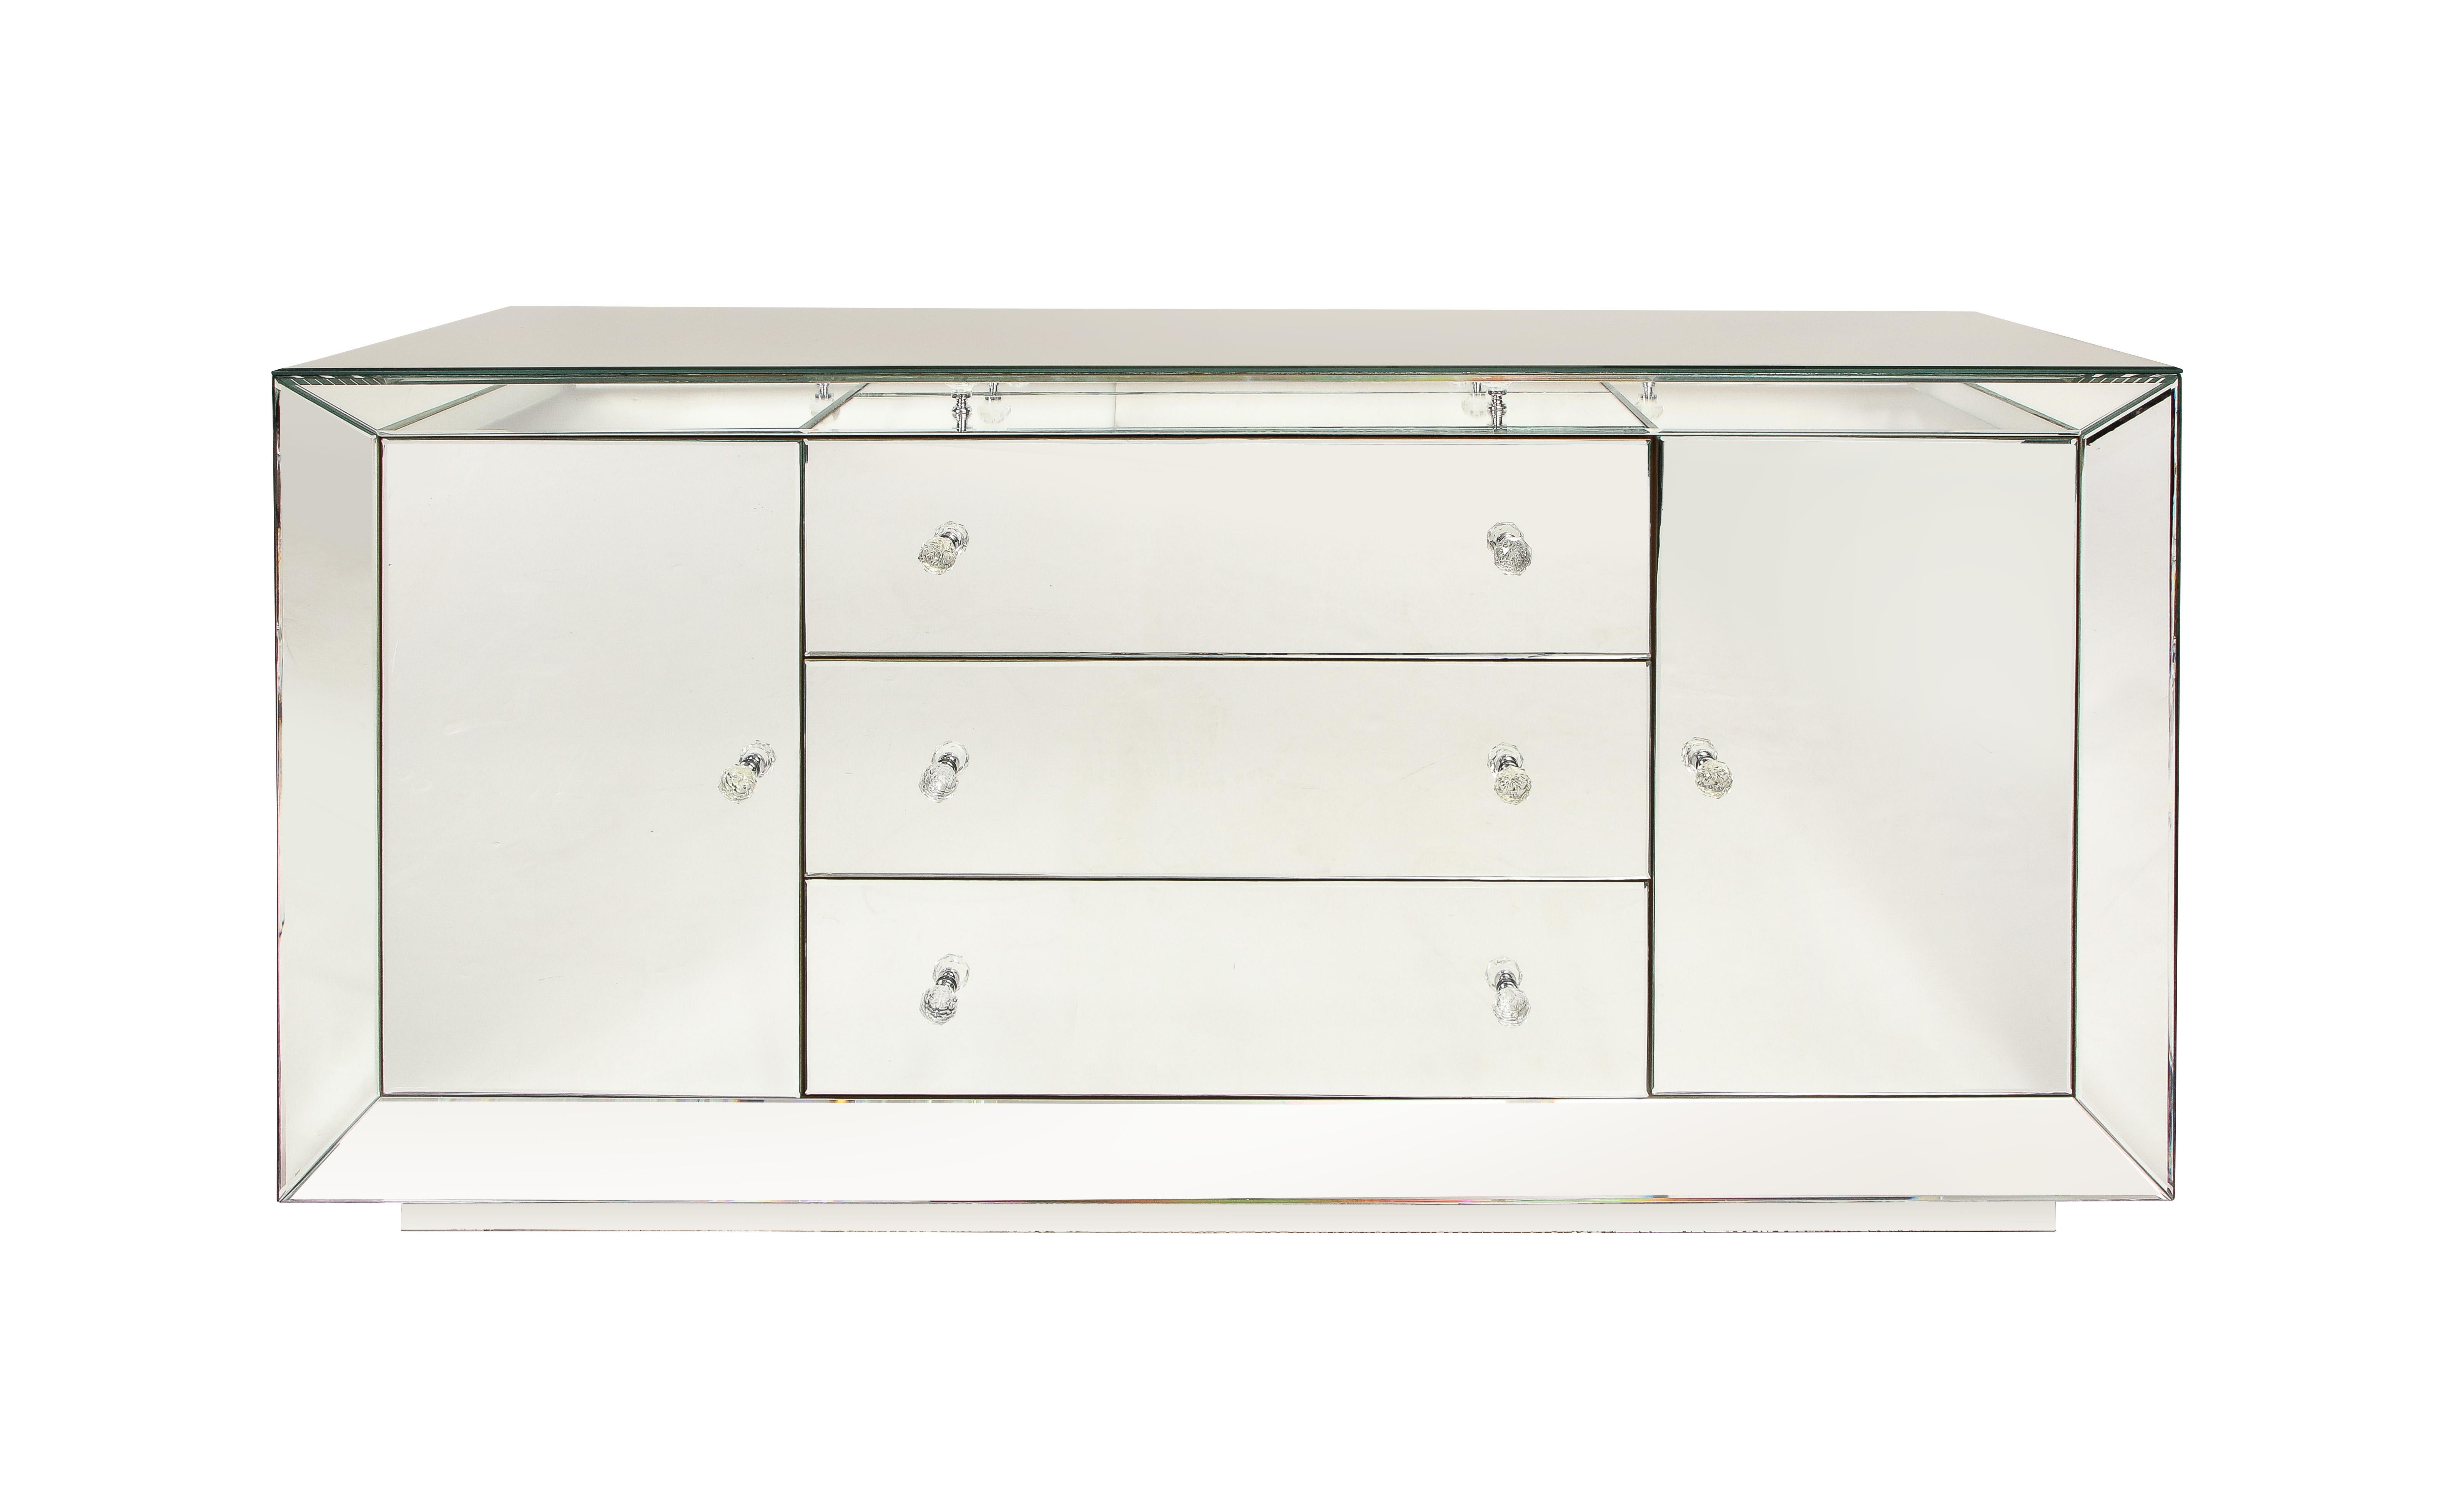 This 21st century pre-owned buffet cabinet was made by Venfield and is also available for custom order in any dimension design and finish. Please inquire with questions regarding customization. This piece is lightly used, preowned, and in the